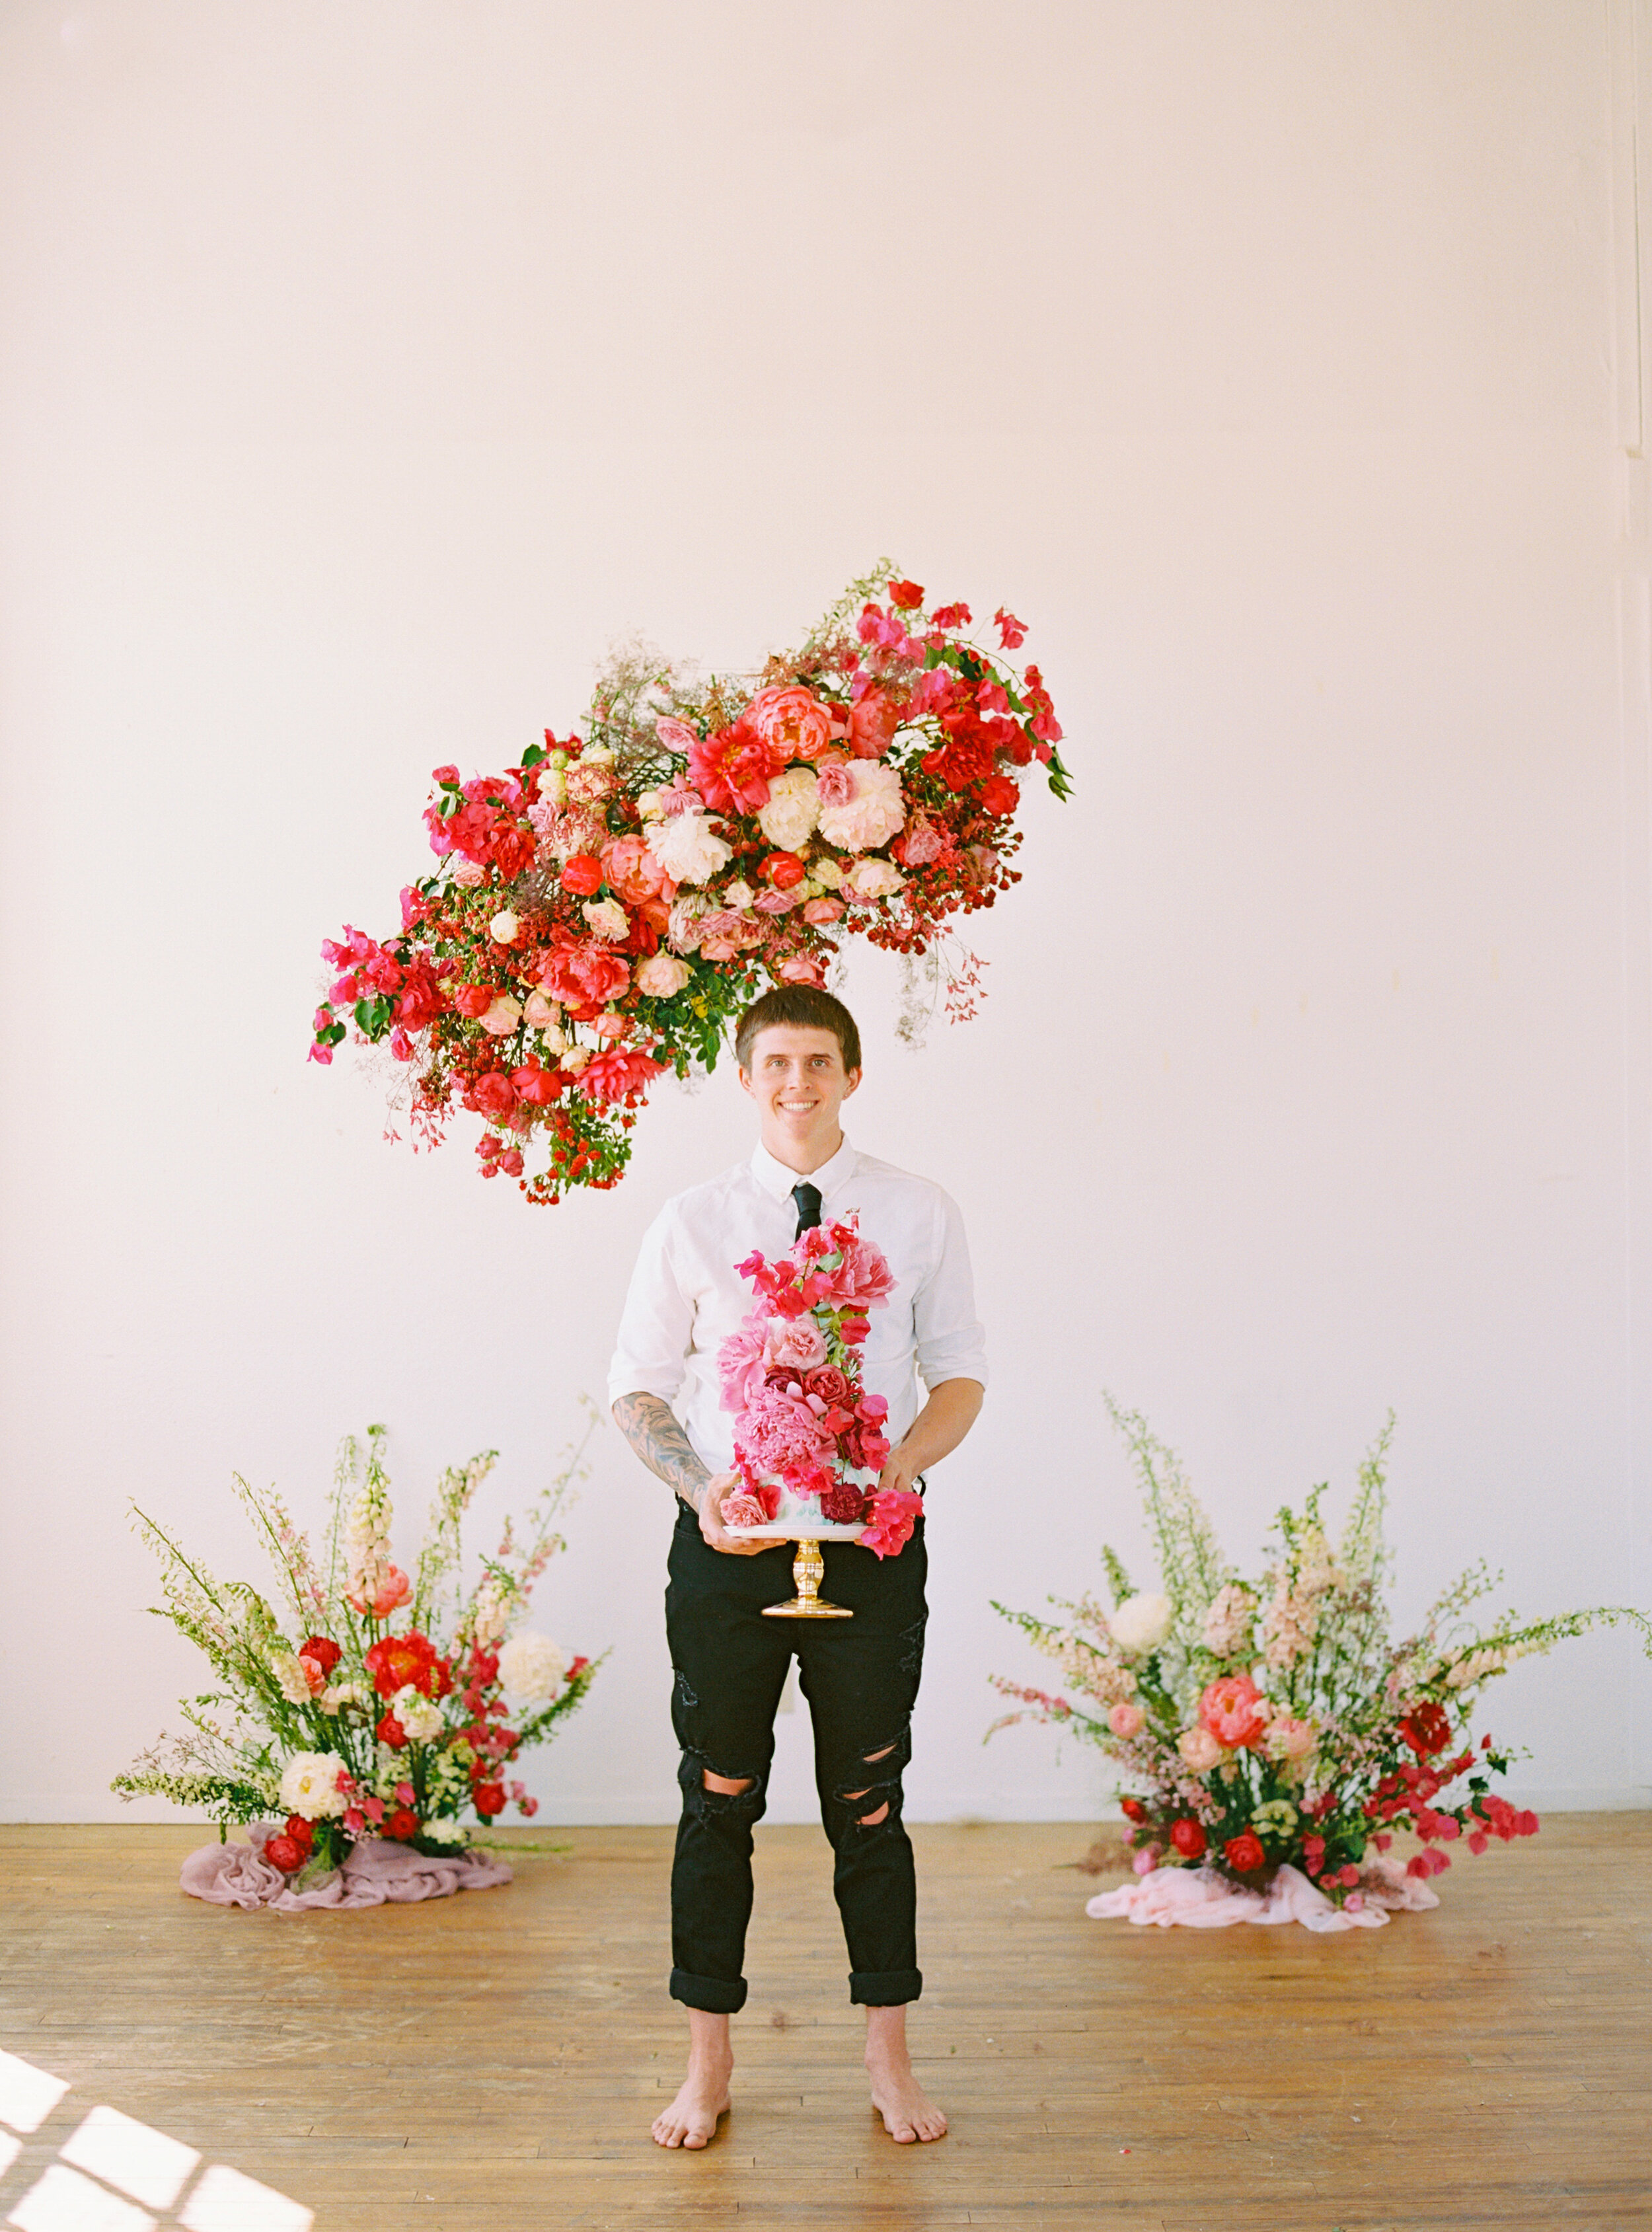 A Romantic Wedding Elopement Filled with Colorful Fuchsia - Sarahi Hadden Submission-9.jpg